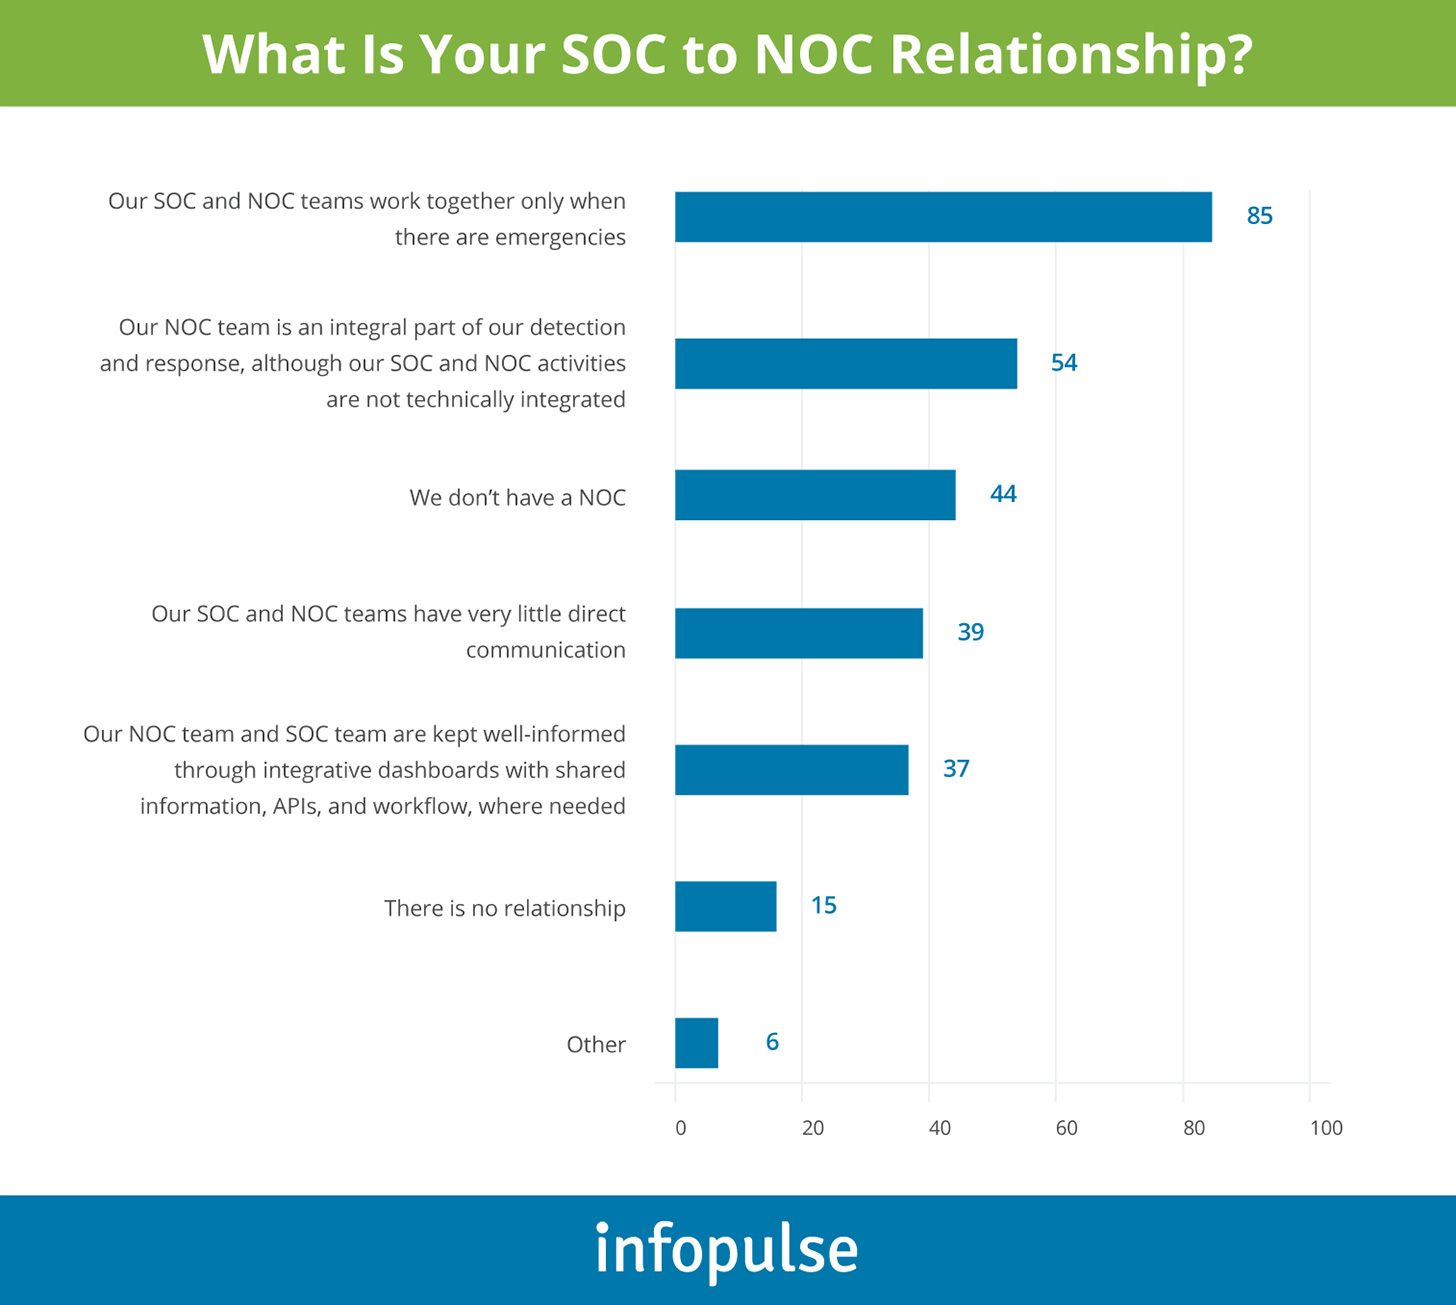 What is your SOC to NOC relationship?